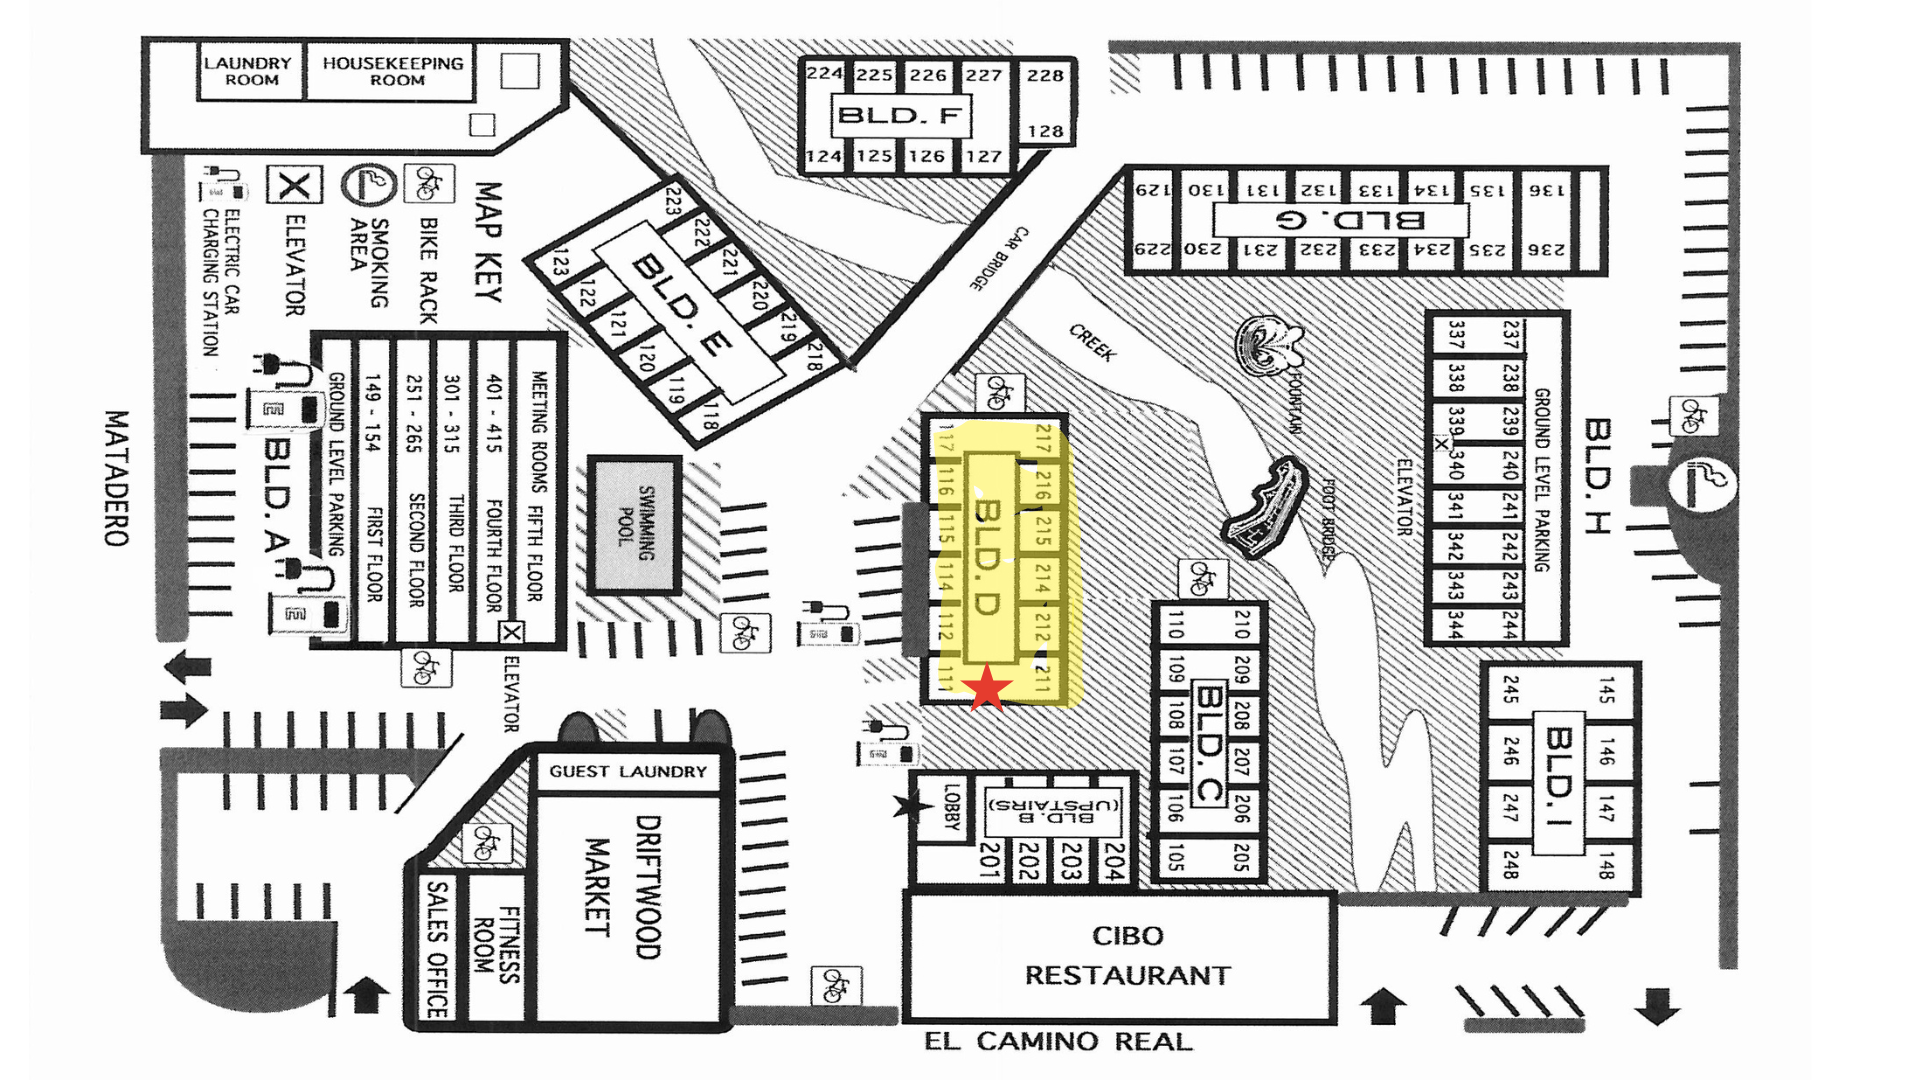 Hotel Map with Building D Highlighted